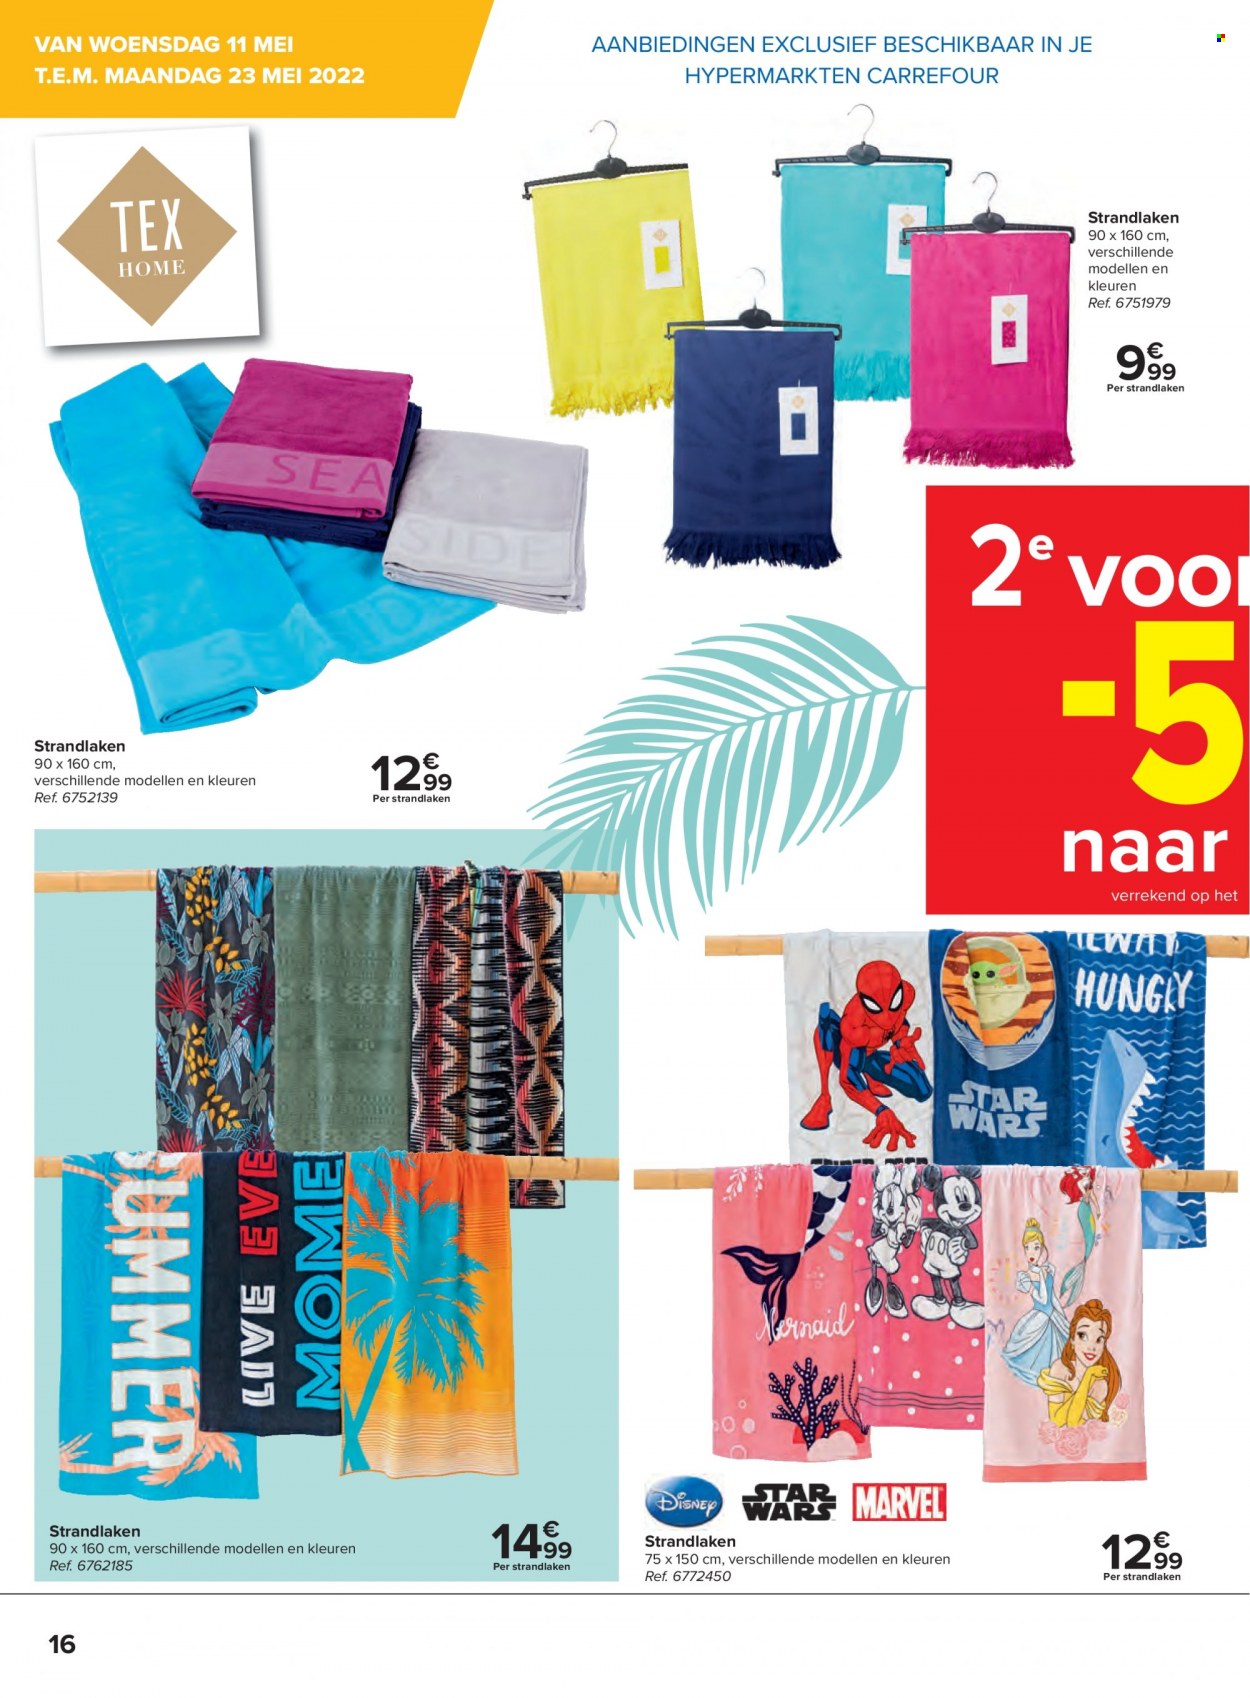 Catalogue Carrefour hypermarkt - 11.5.2022 - 23.5.2022. Page 16.